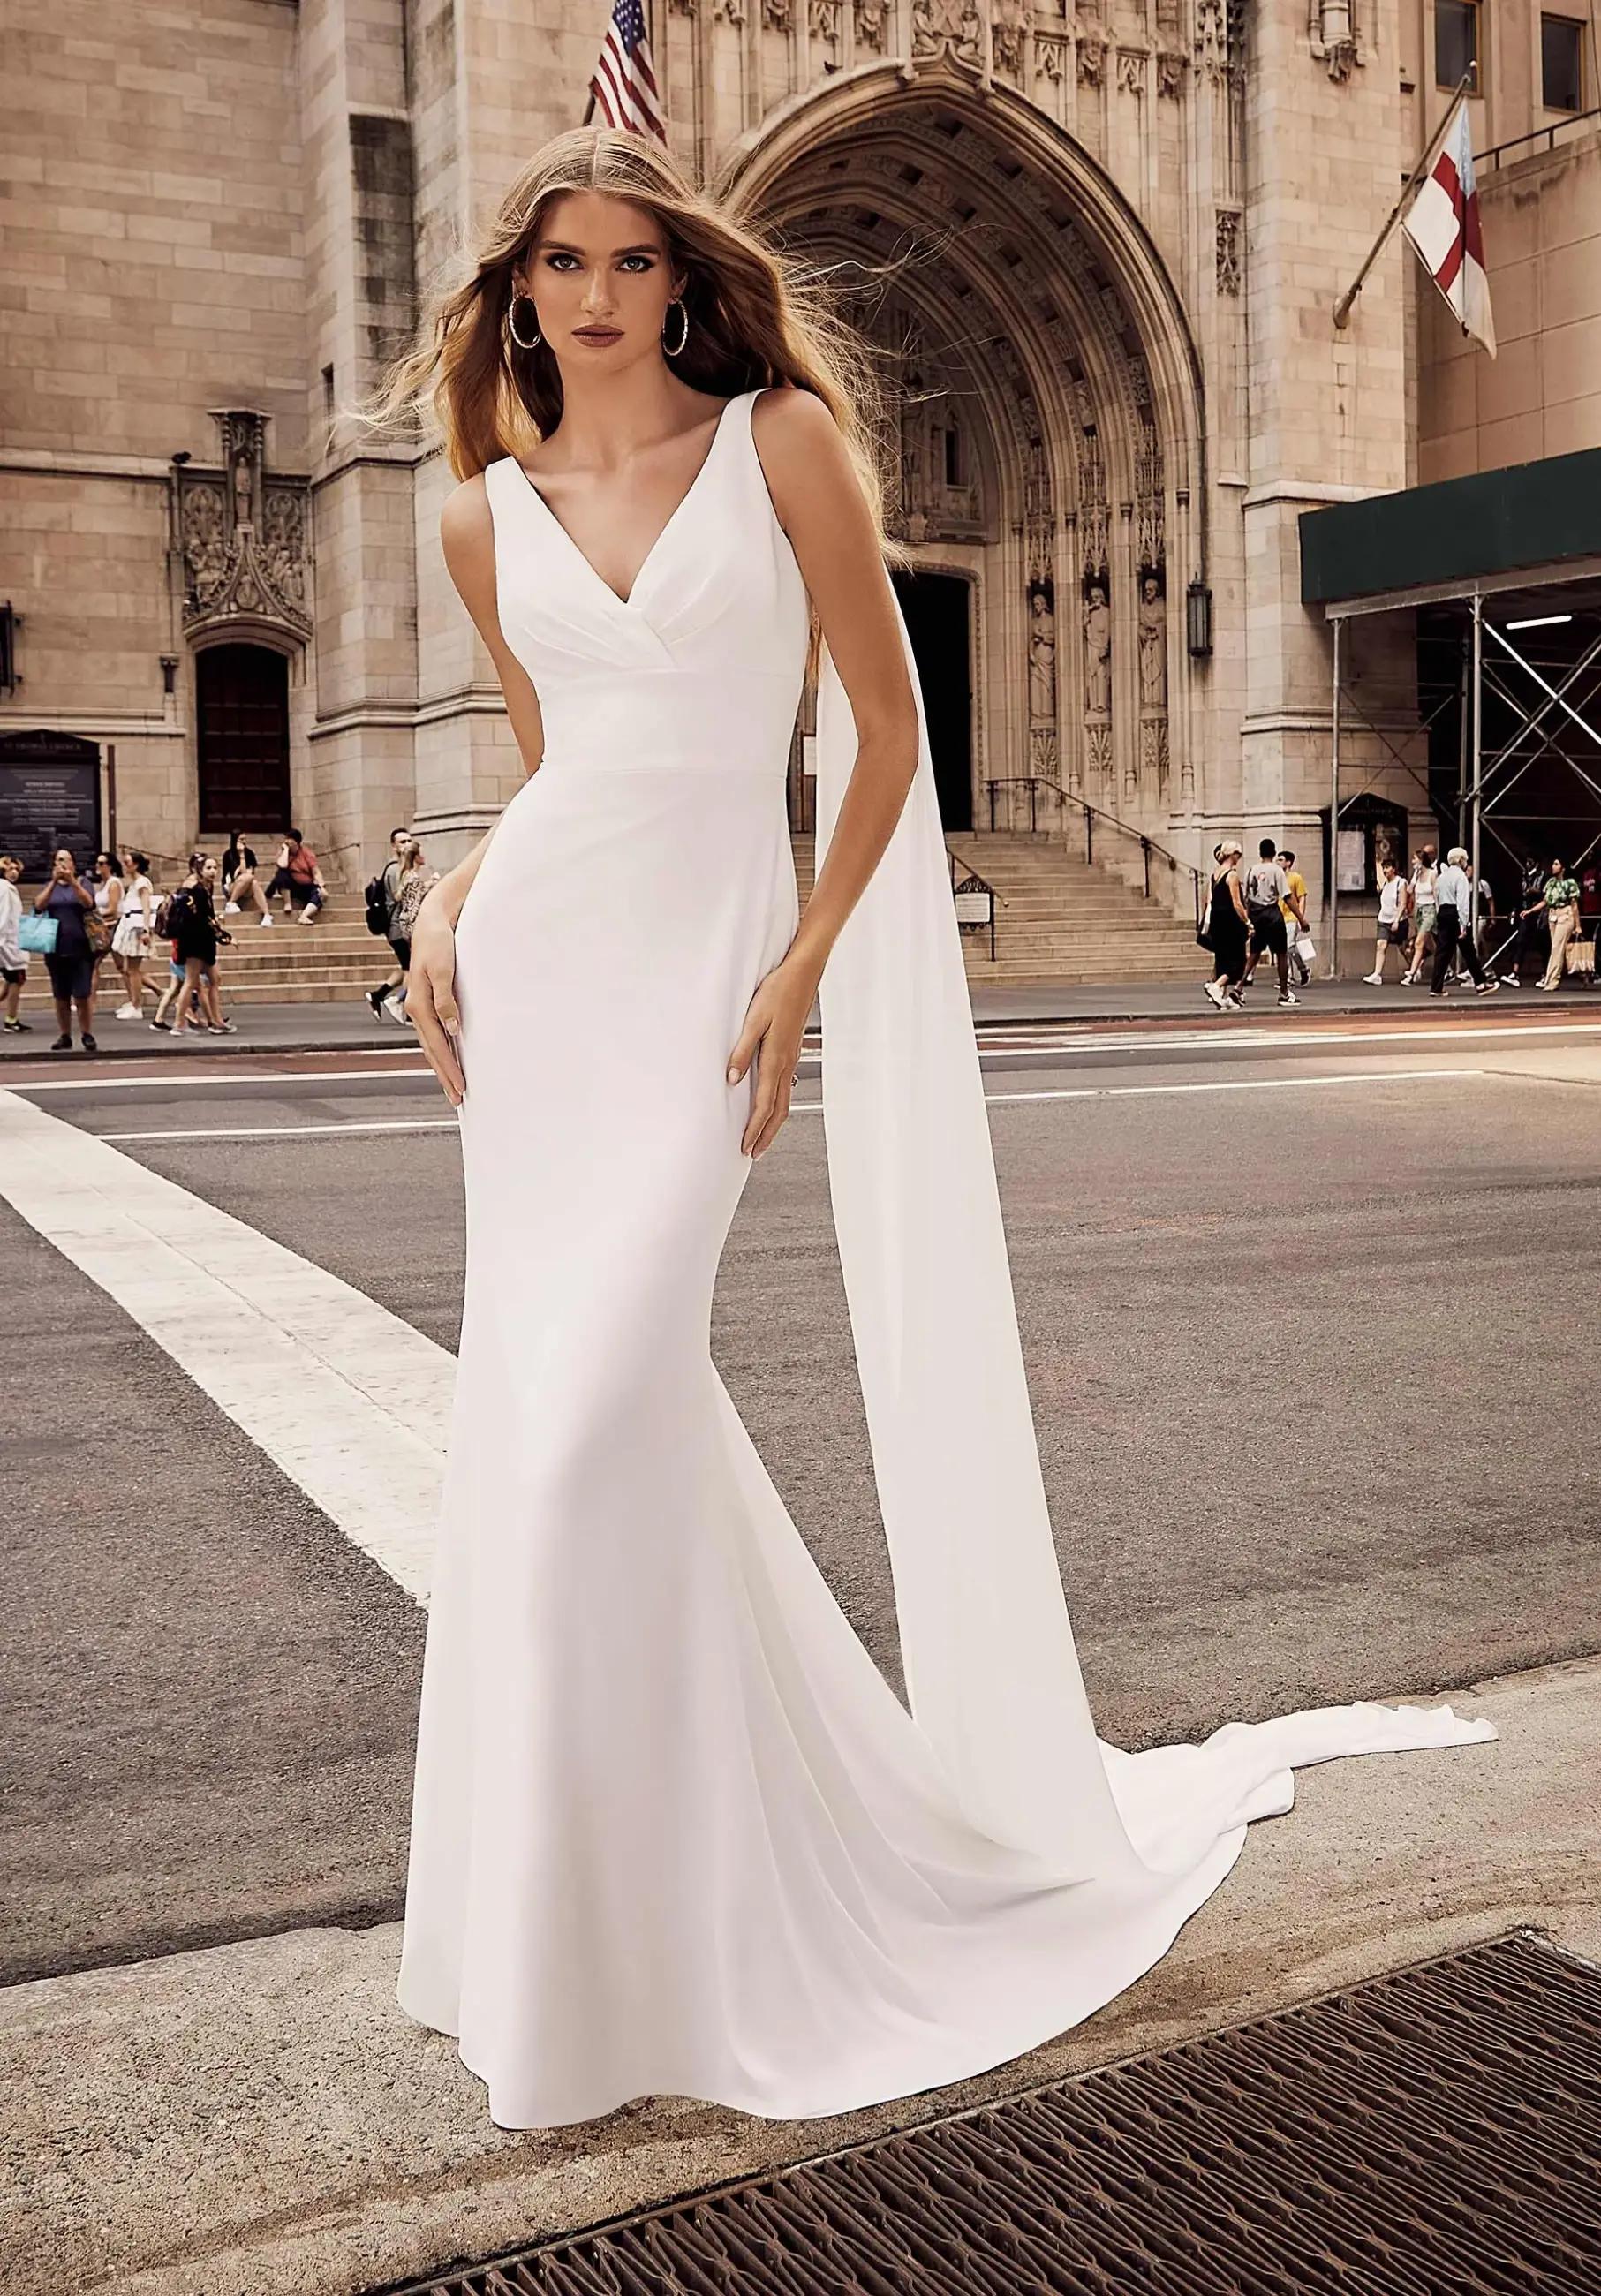 Tying the Knot in Style: Winter/Spring Bridal Trends Unveiled. Desktop Image